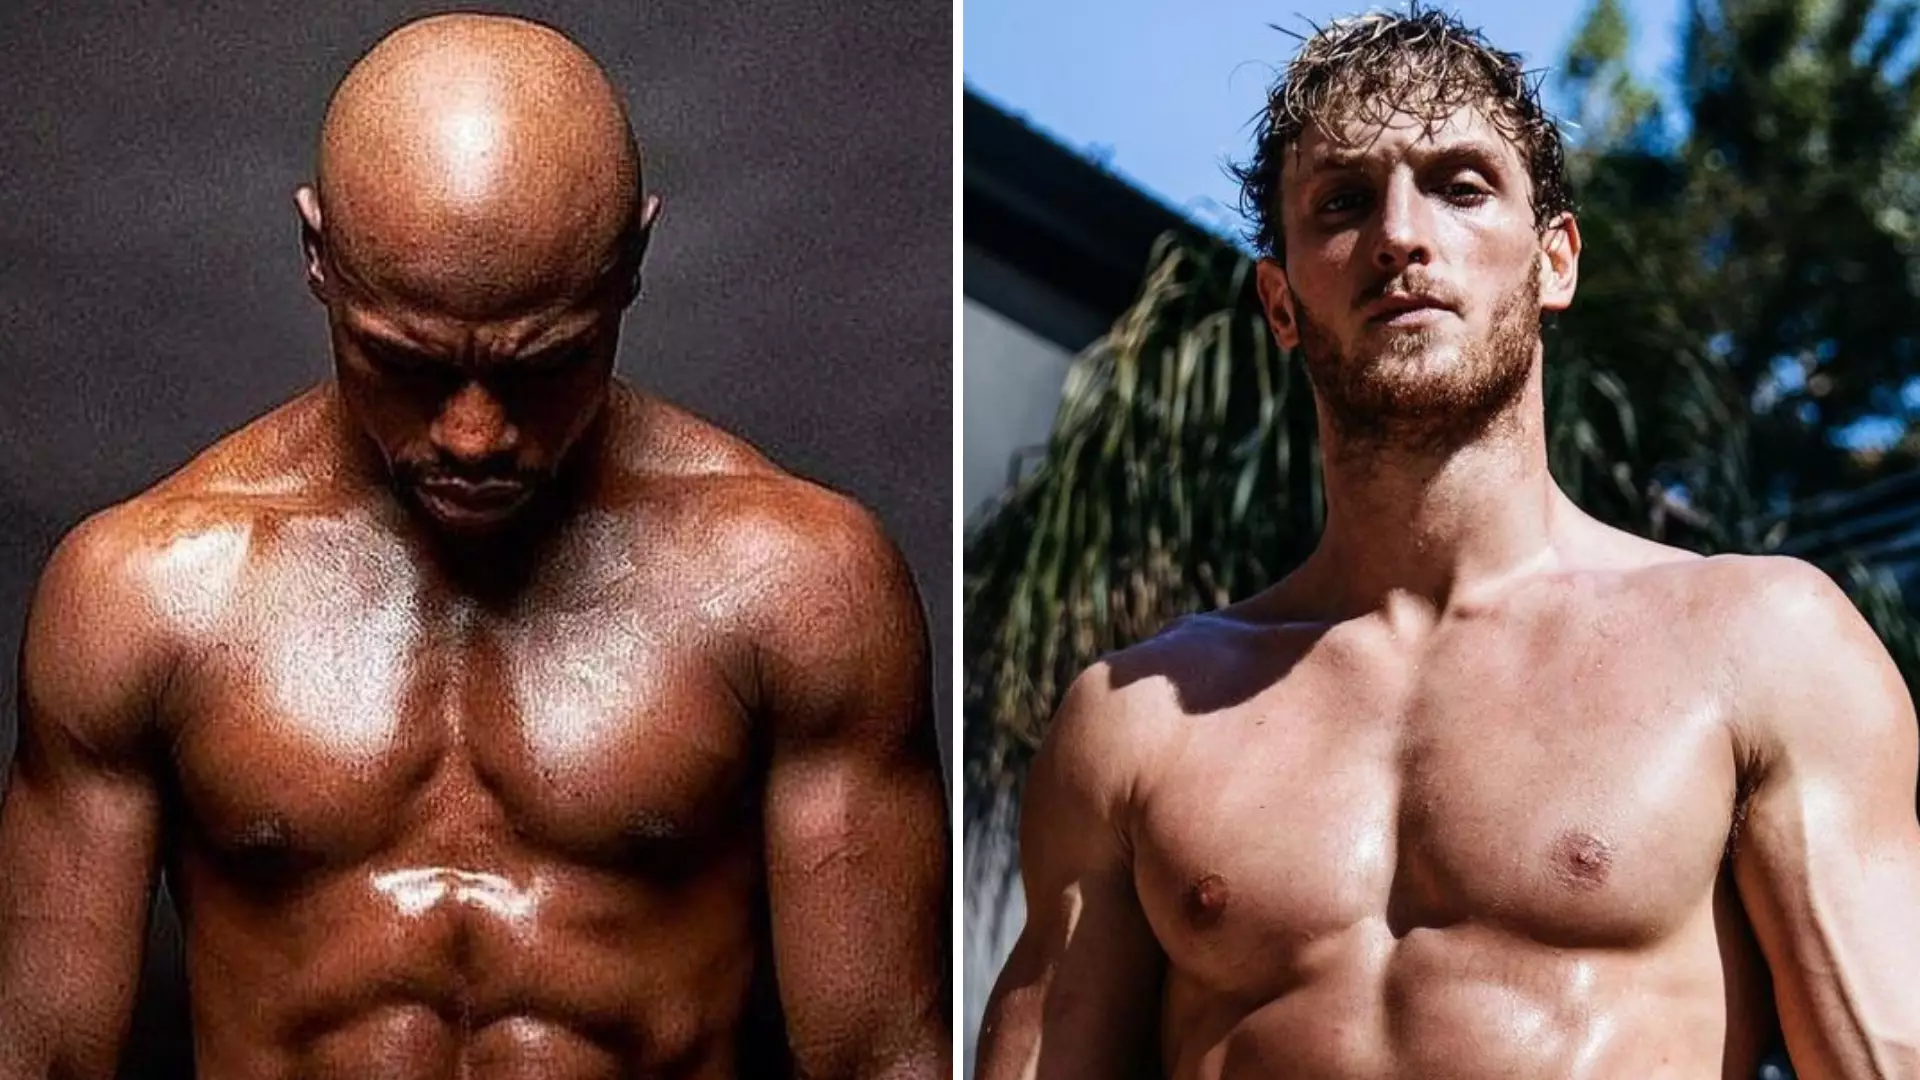 Floyd Mayweather Vs Logan Paul Predicted To Smash PPV Record For Richest Fight In History